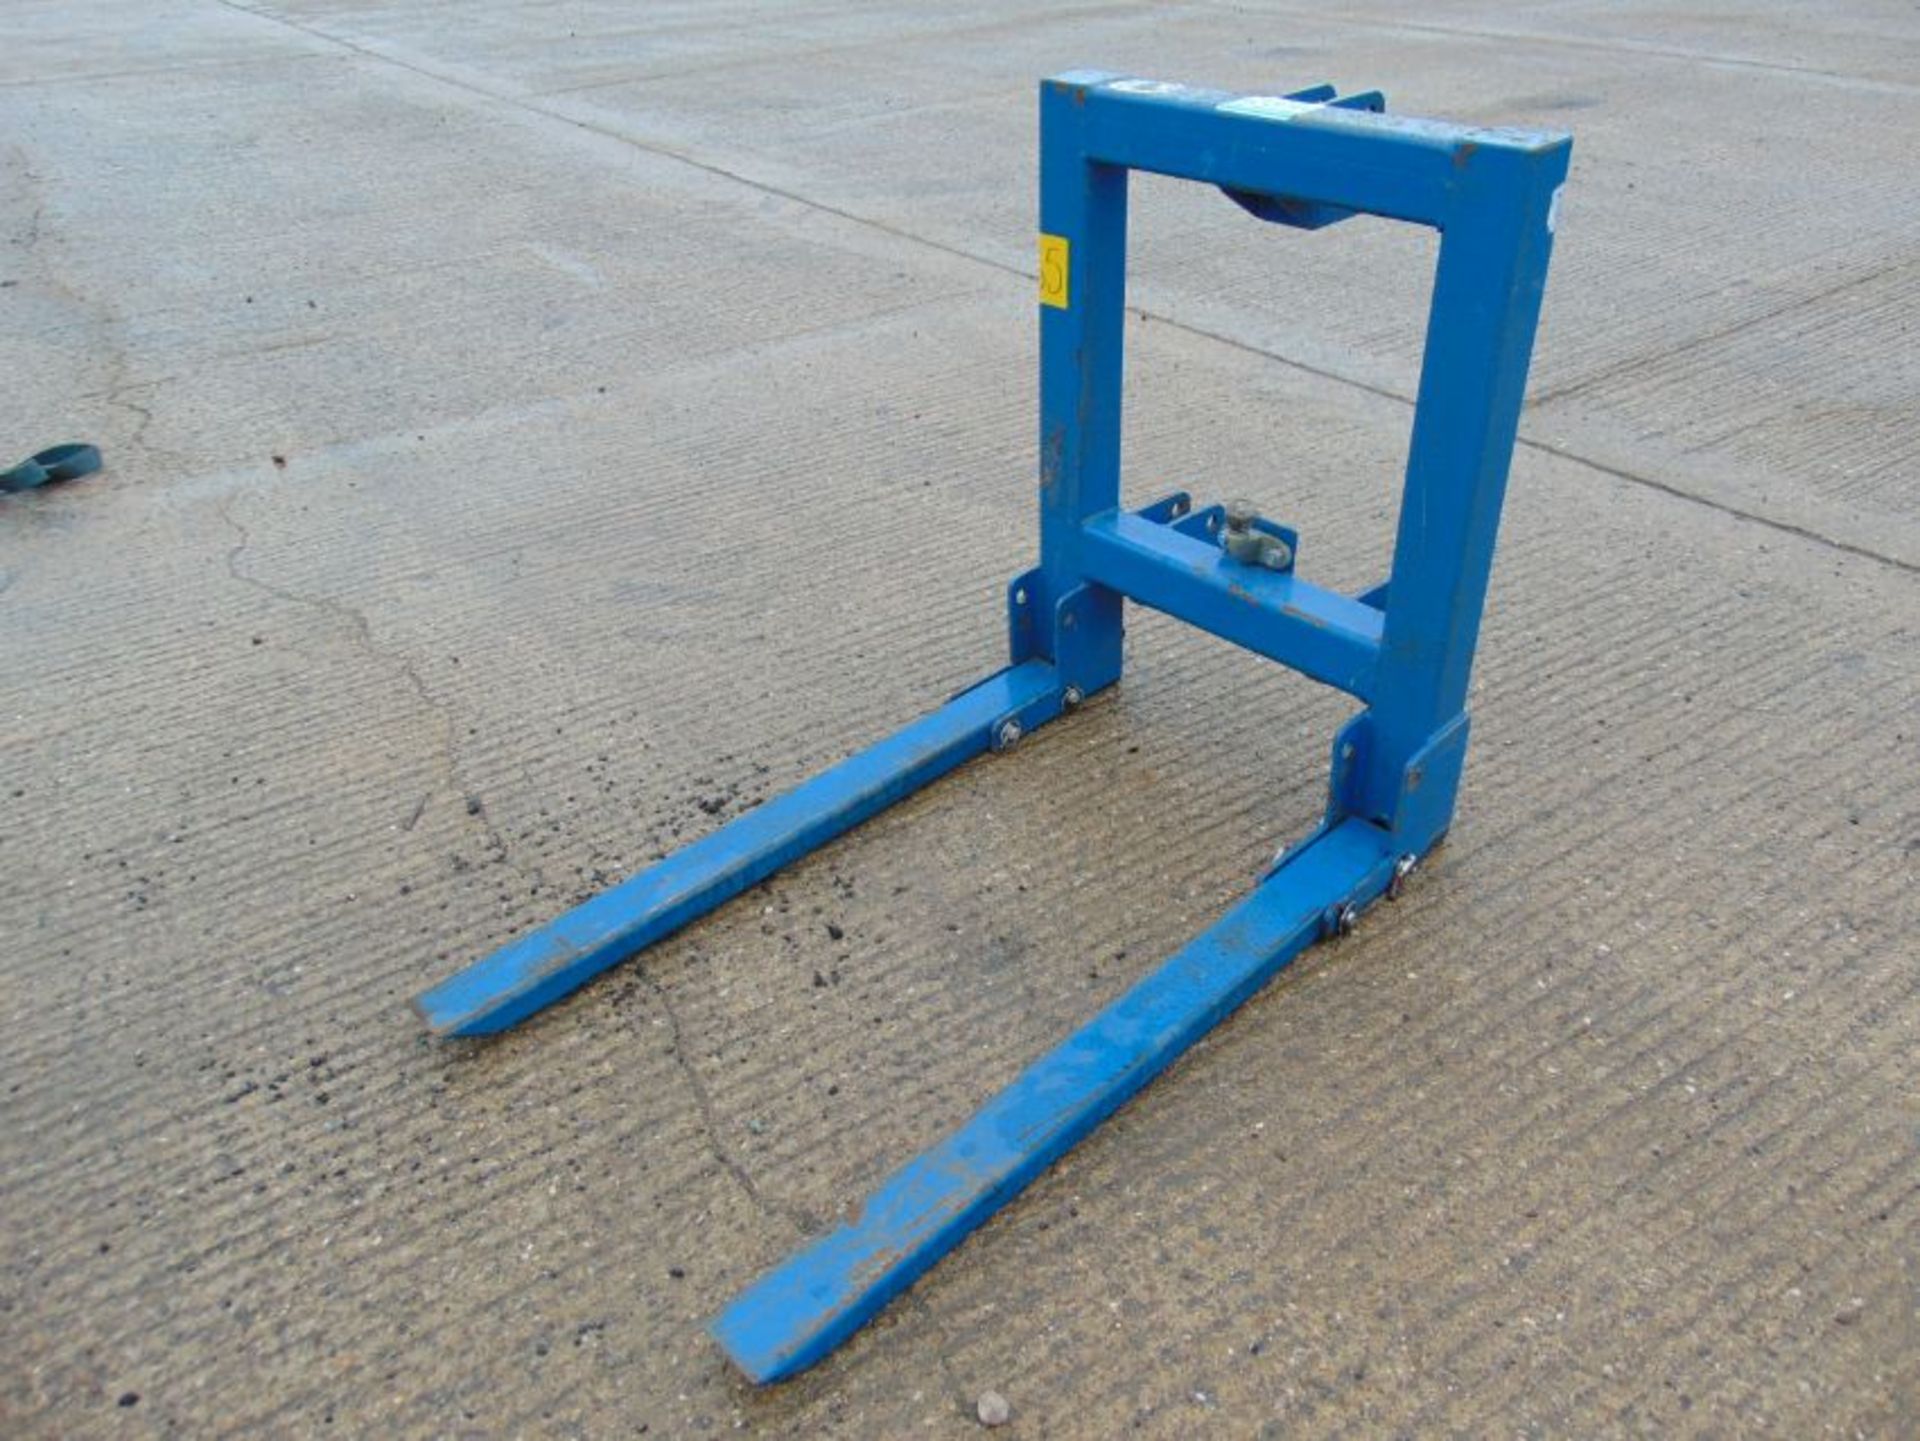 Tractor Forks & Hitch Attachment (Fold Up Forks C/w Hitch)